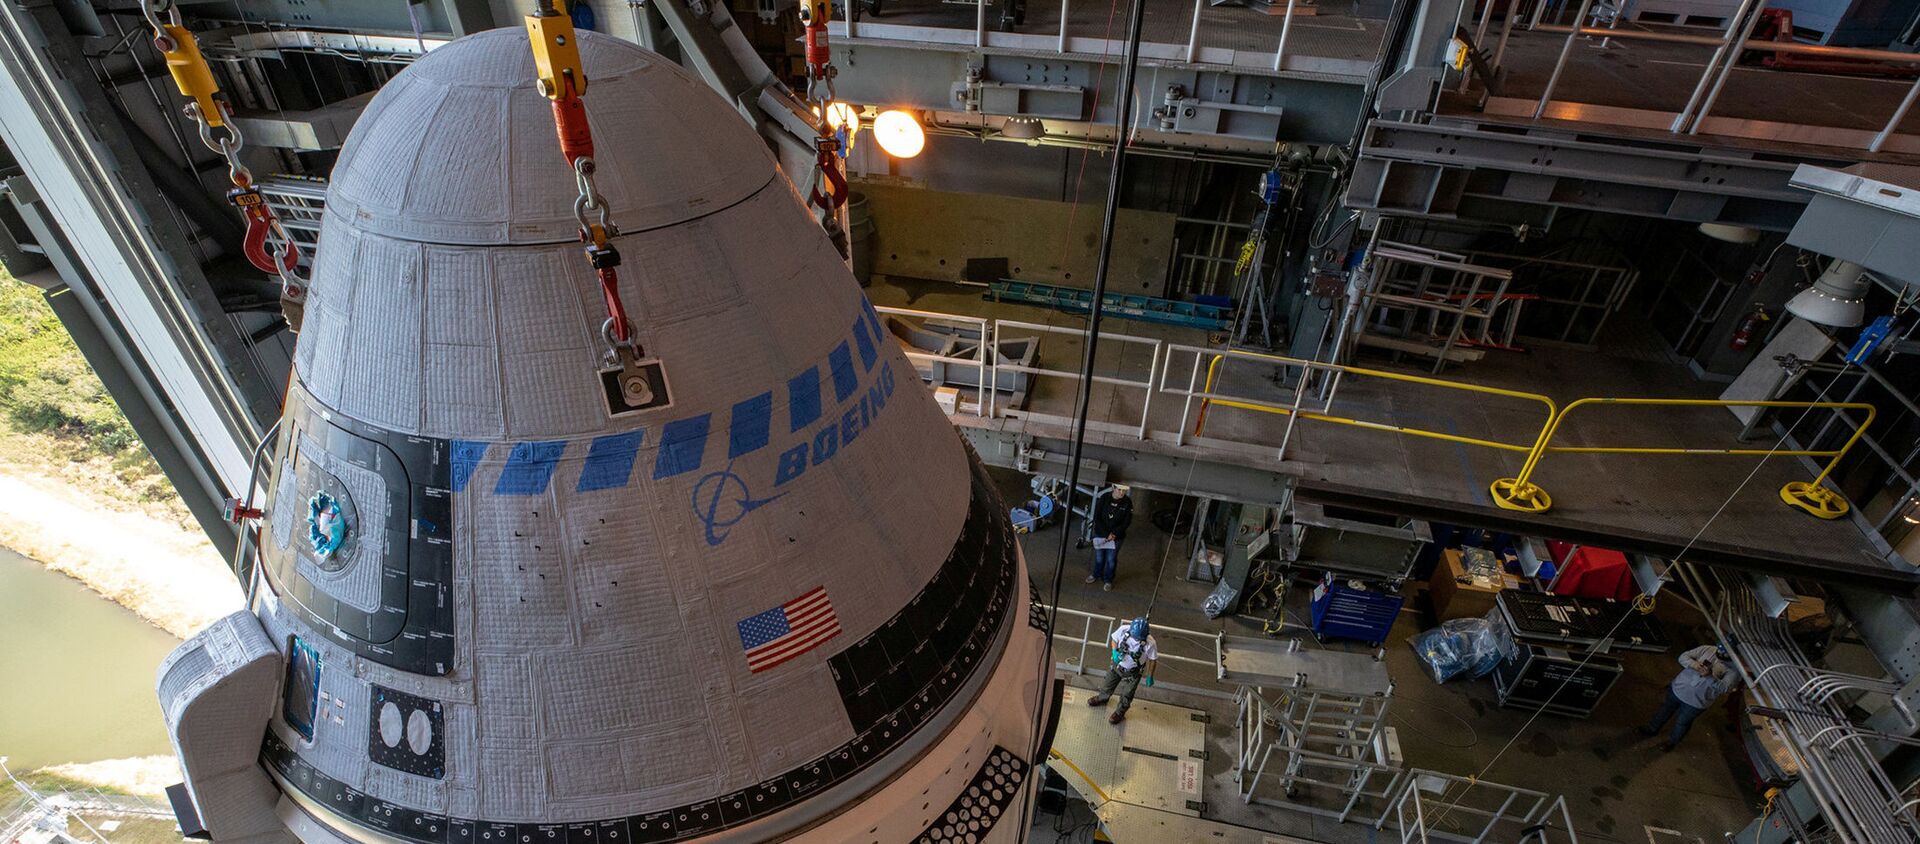 The Boeing CST-100 Starliner spacecraft is guided into position above a United Launch Alliance Atlas V rocket at the Vertical Integration Facility at Space Launch Complex 41 at Cape Canaveral Air Force Station, Florida, U.S. November 21, 2019. - Sputnik International, 1920, 22.12.2019